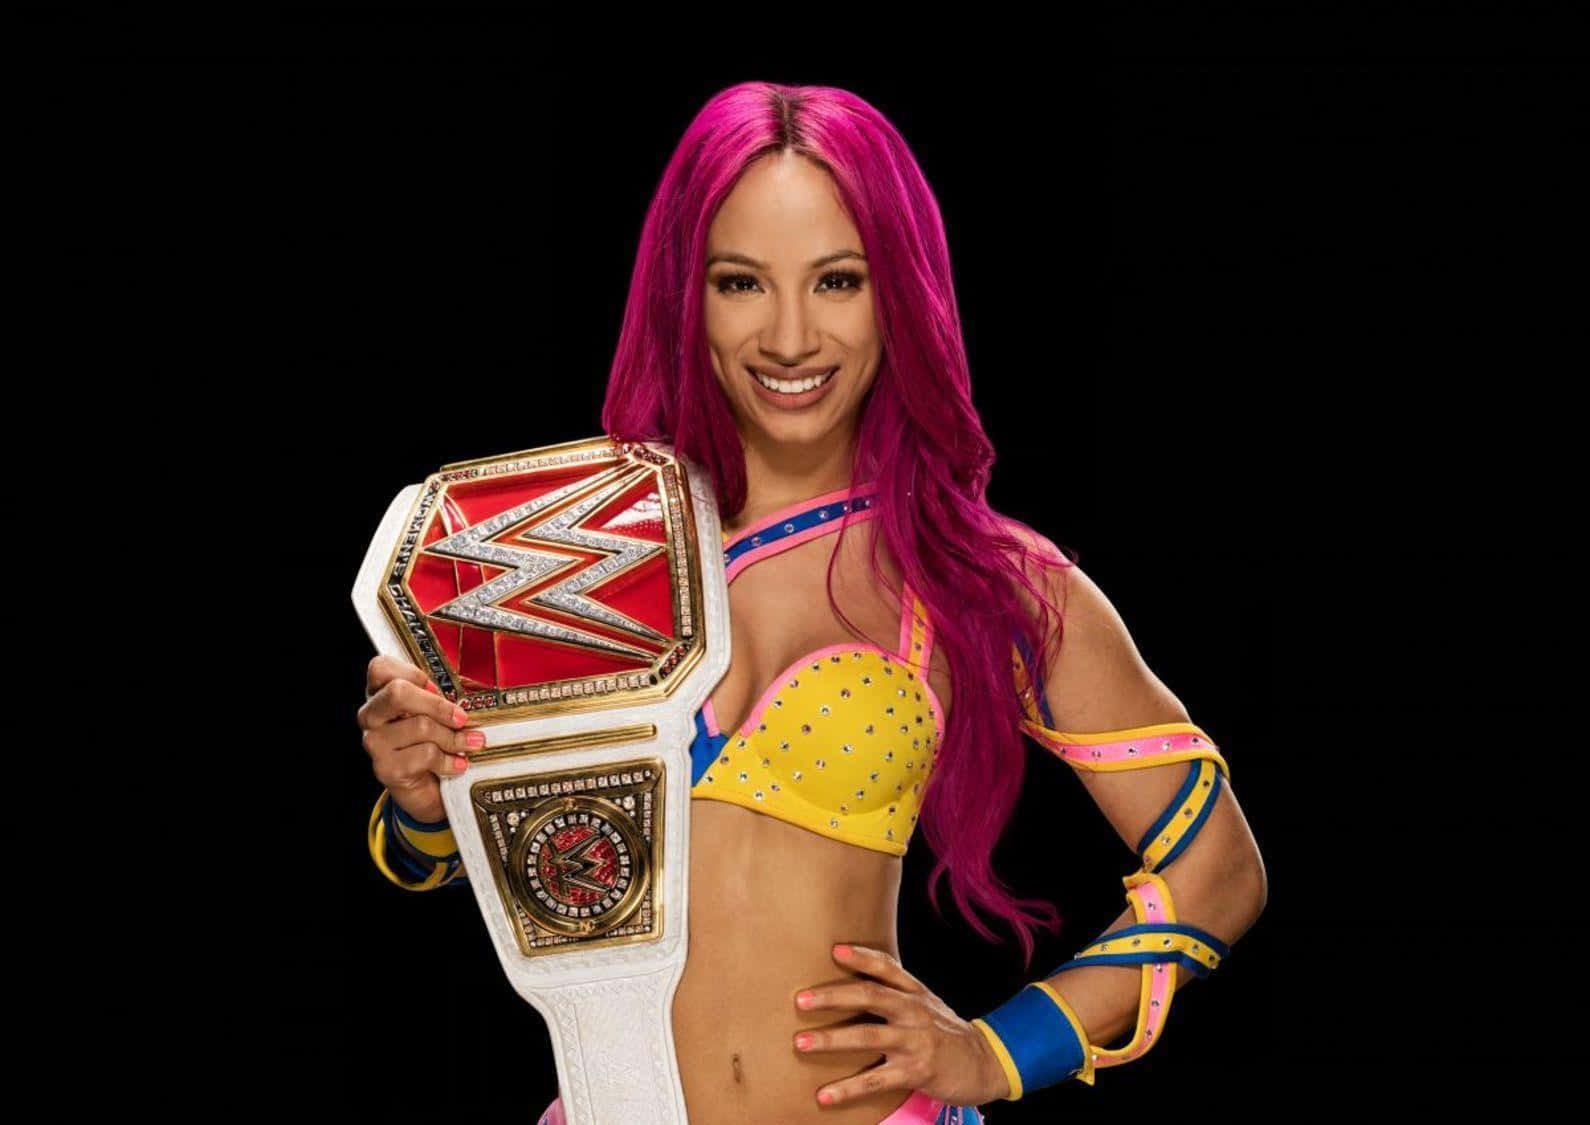 A Woman With Pink Hair Holding A Wwe Championship Wallpaper